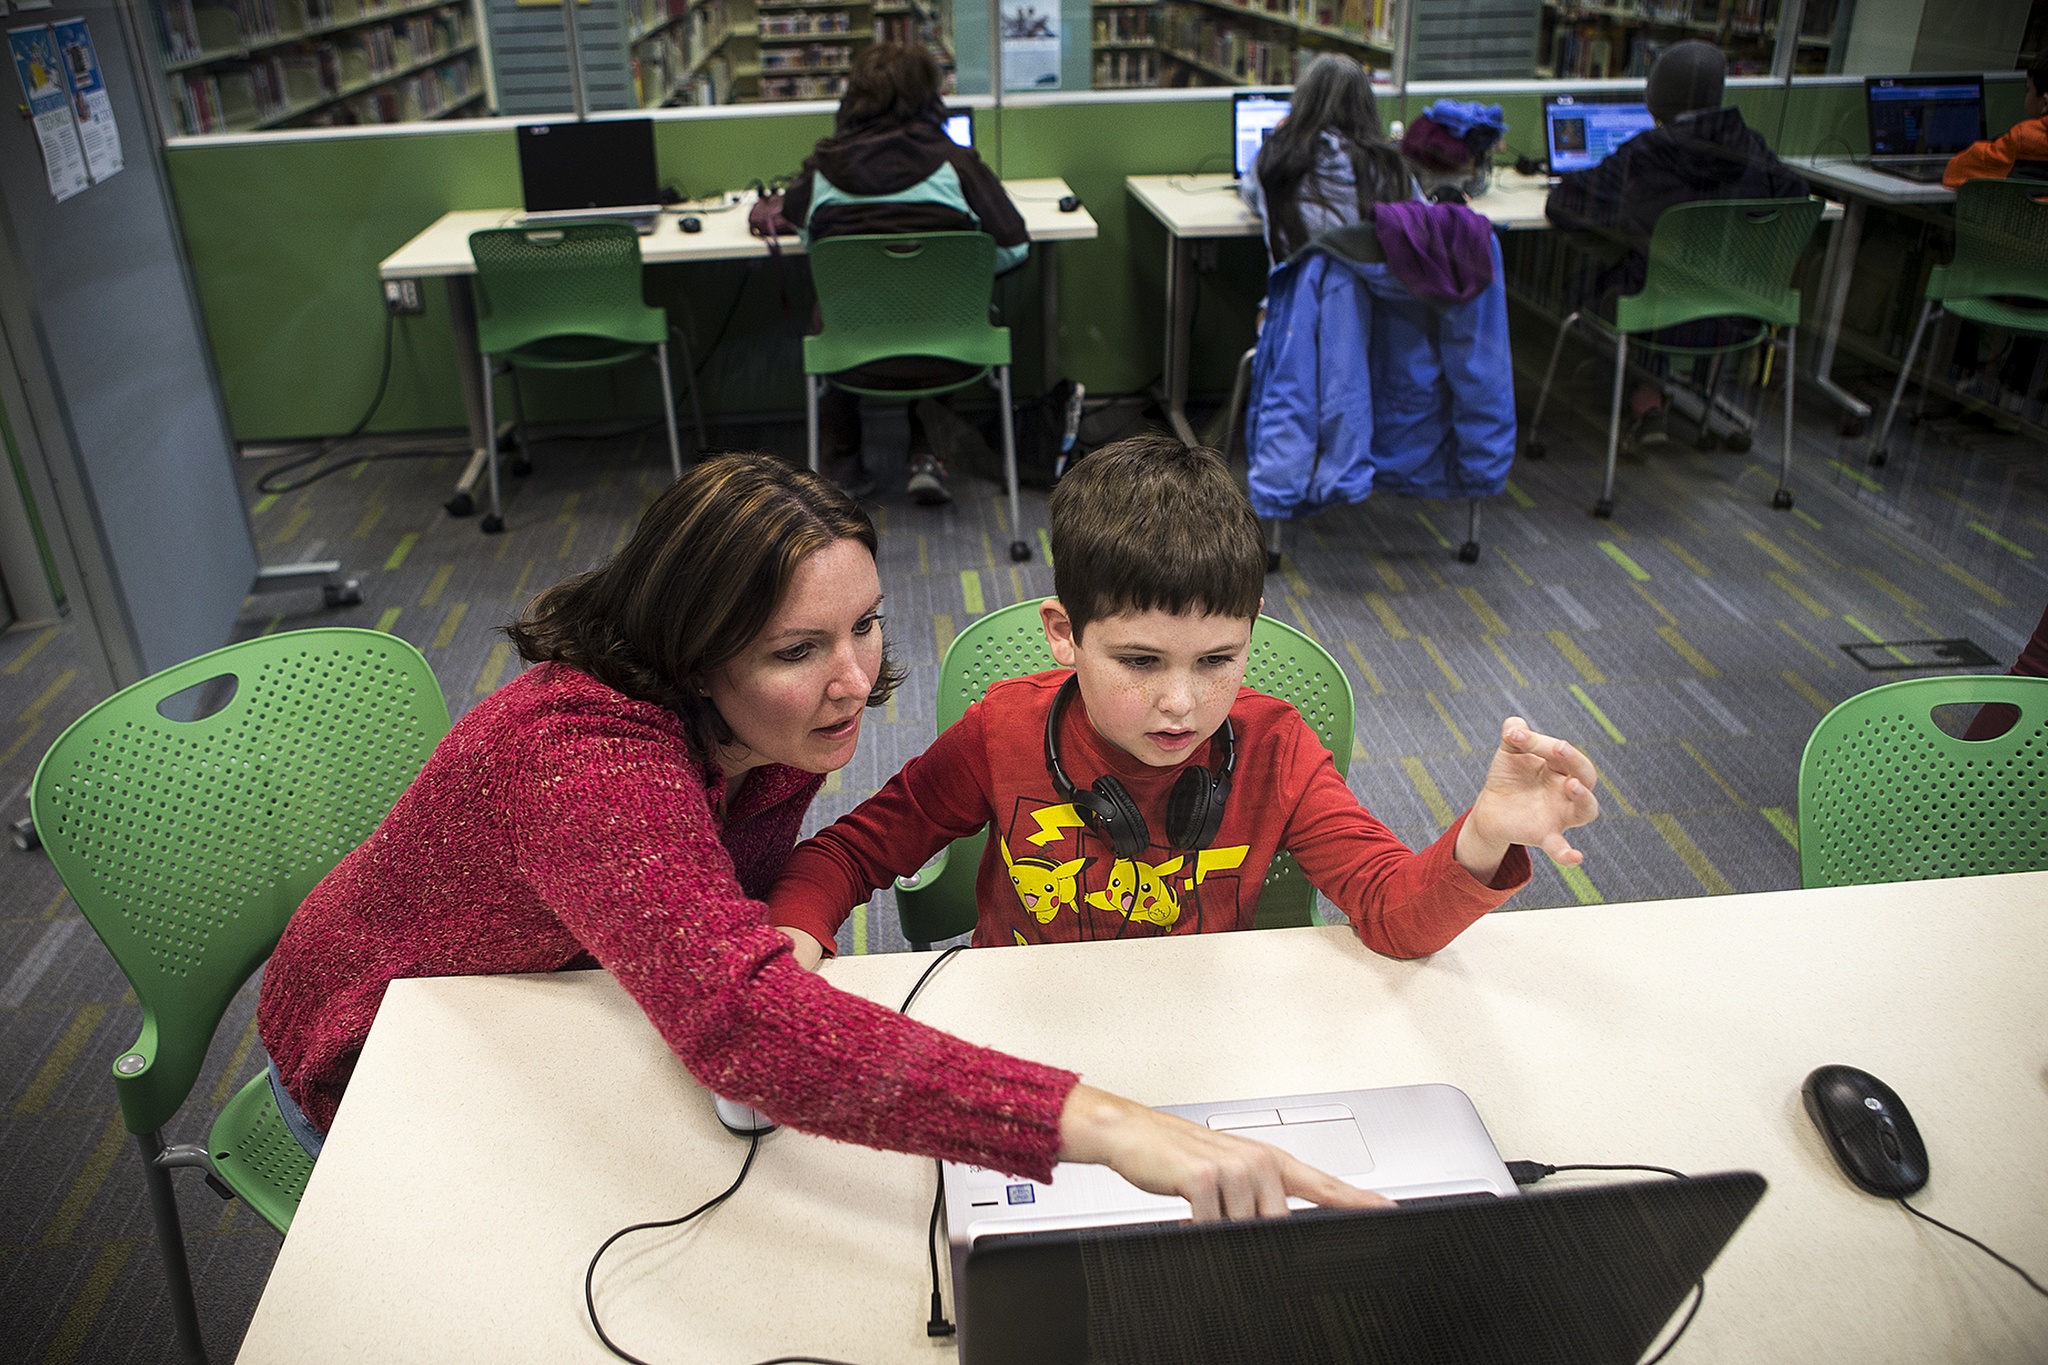 Alexander Reed, 7, of Everett, and his mom, Yvonne, work through a computer coding program together at the “Hour of Code” event at the Lynnwood Library on Saturday, Dec. 10. (Ian Terry / The Herald)